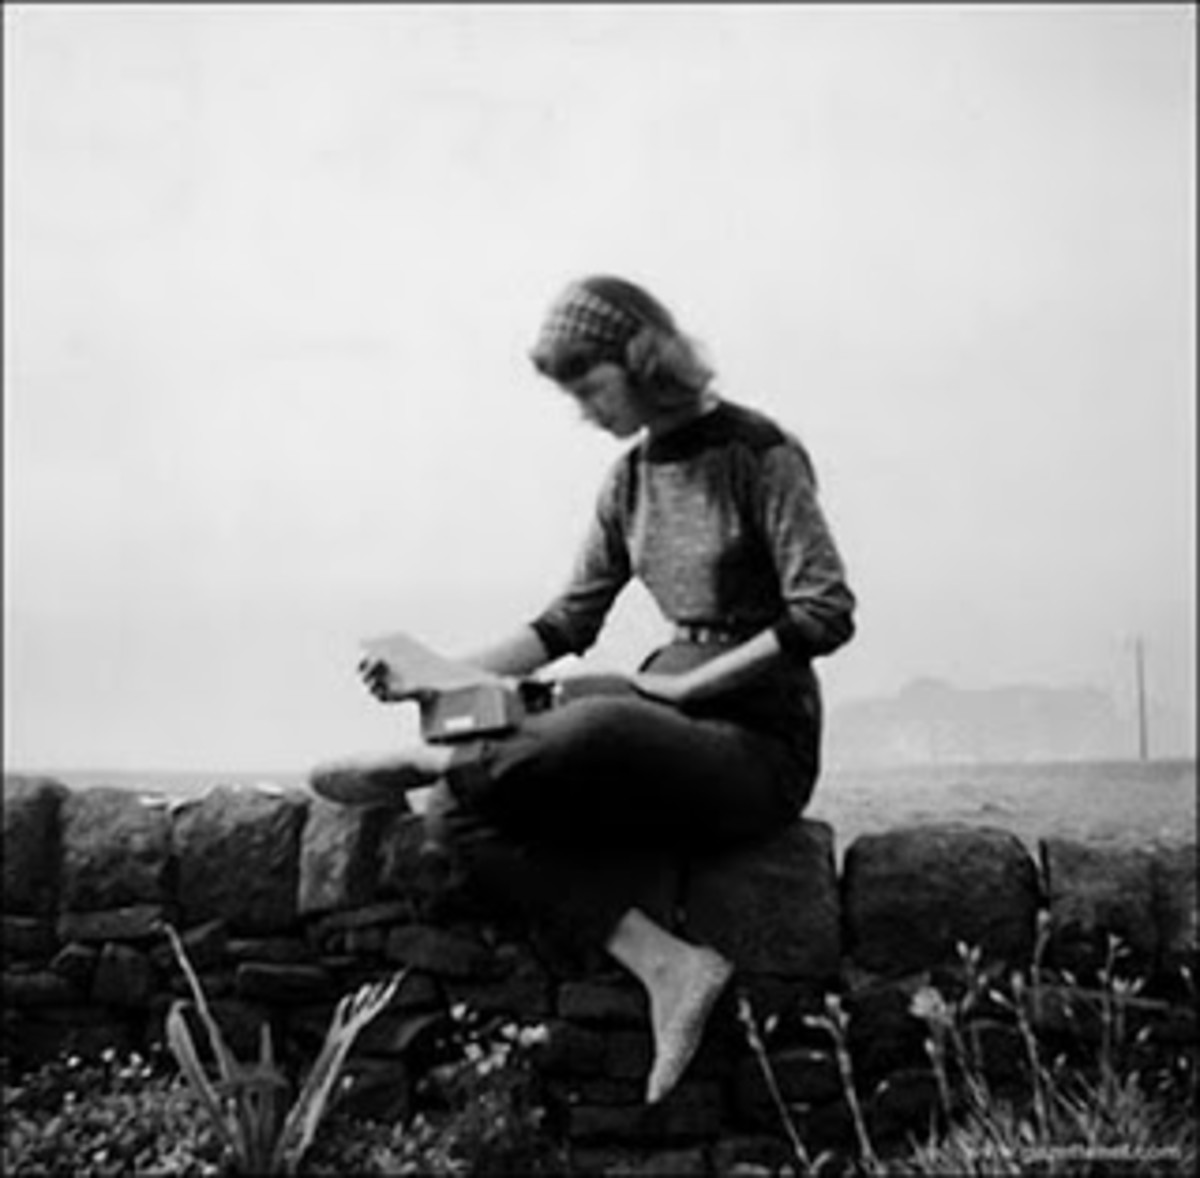 sylvia-plath-her-life-and-importance-to-american-literature-and-history